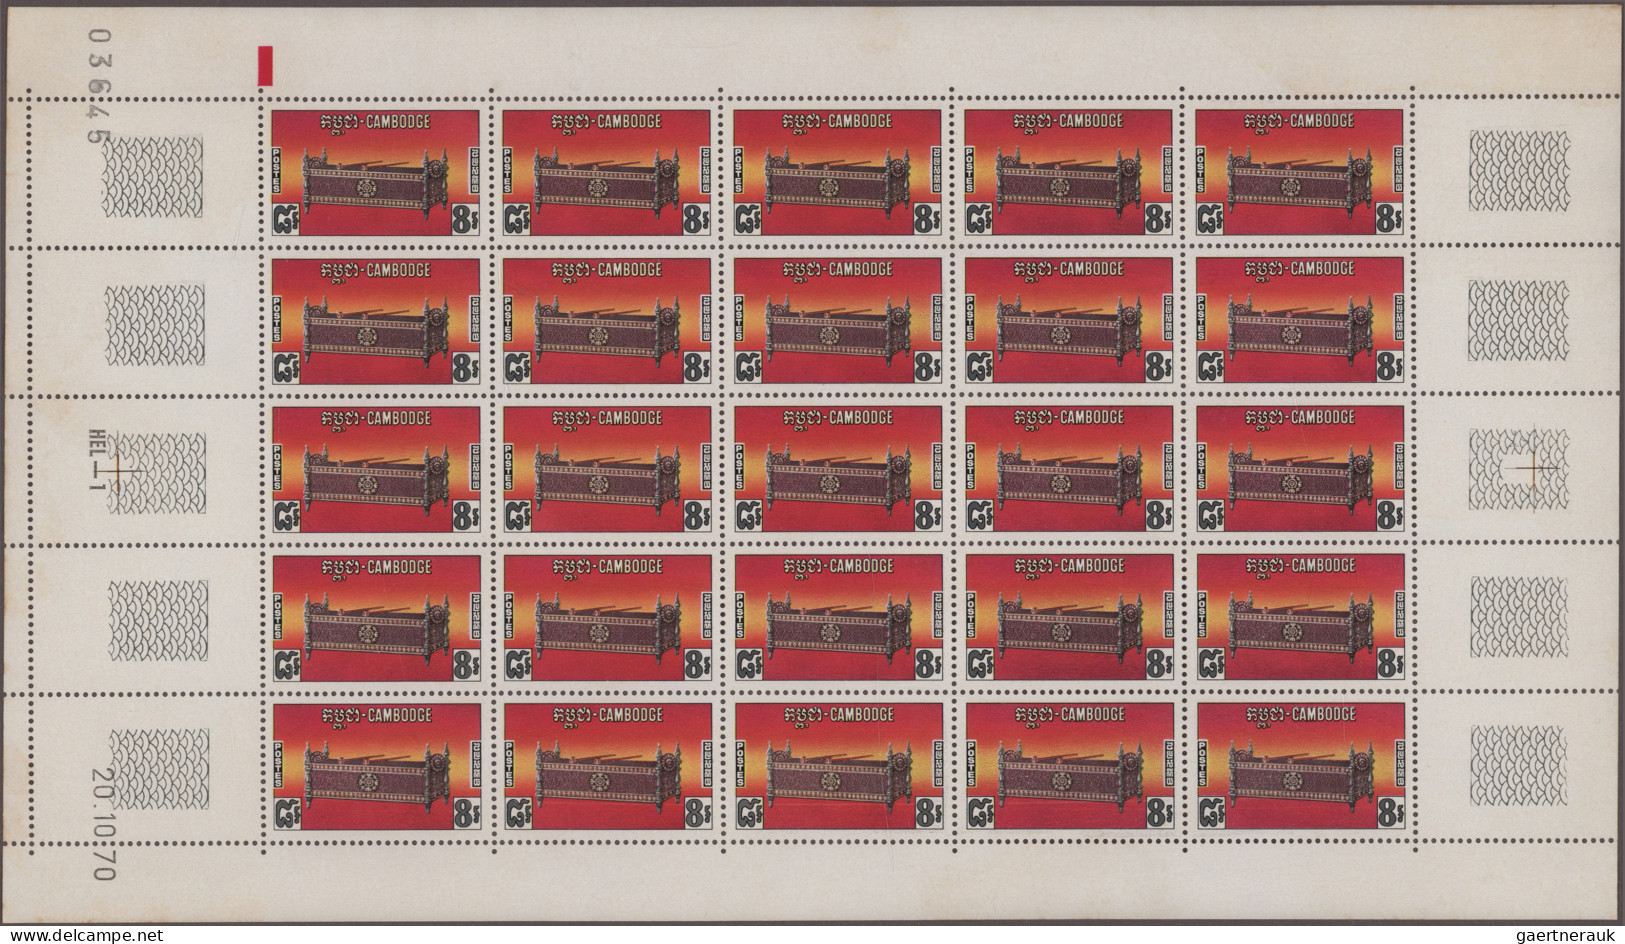 Cambodia: 1975 'Musical Instruments': Unissued set of 8 in sheets of 25 each, WI